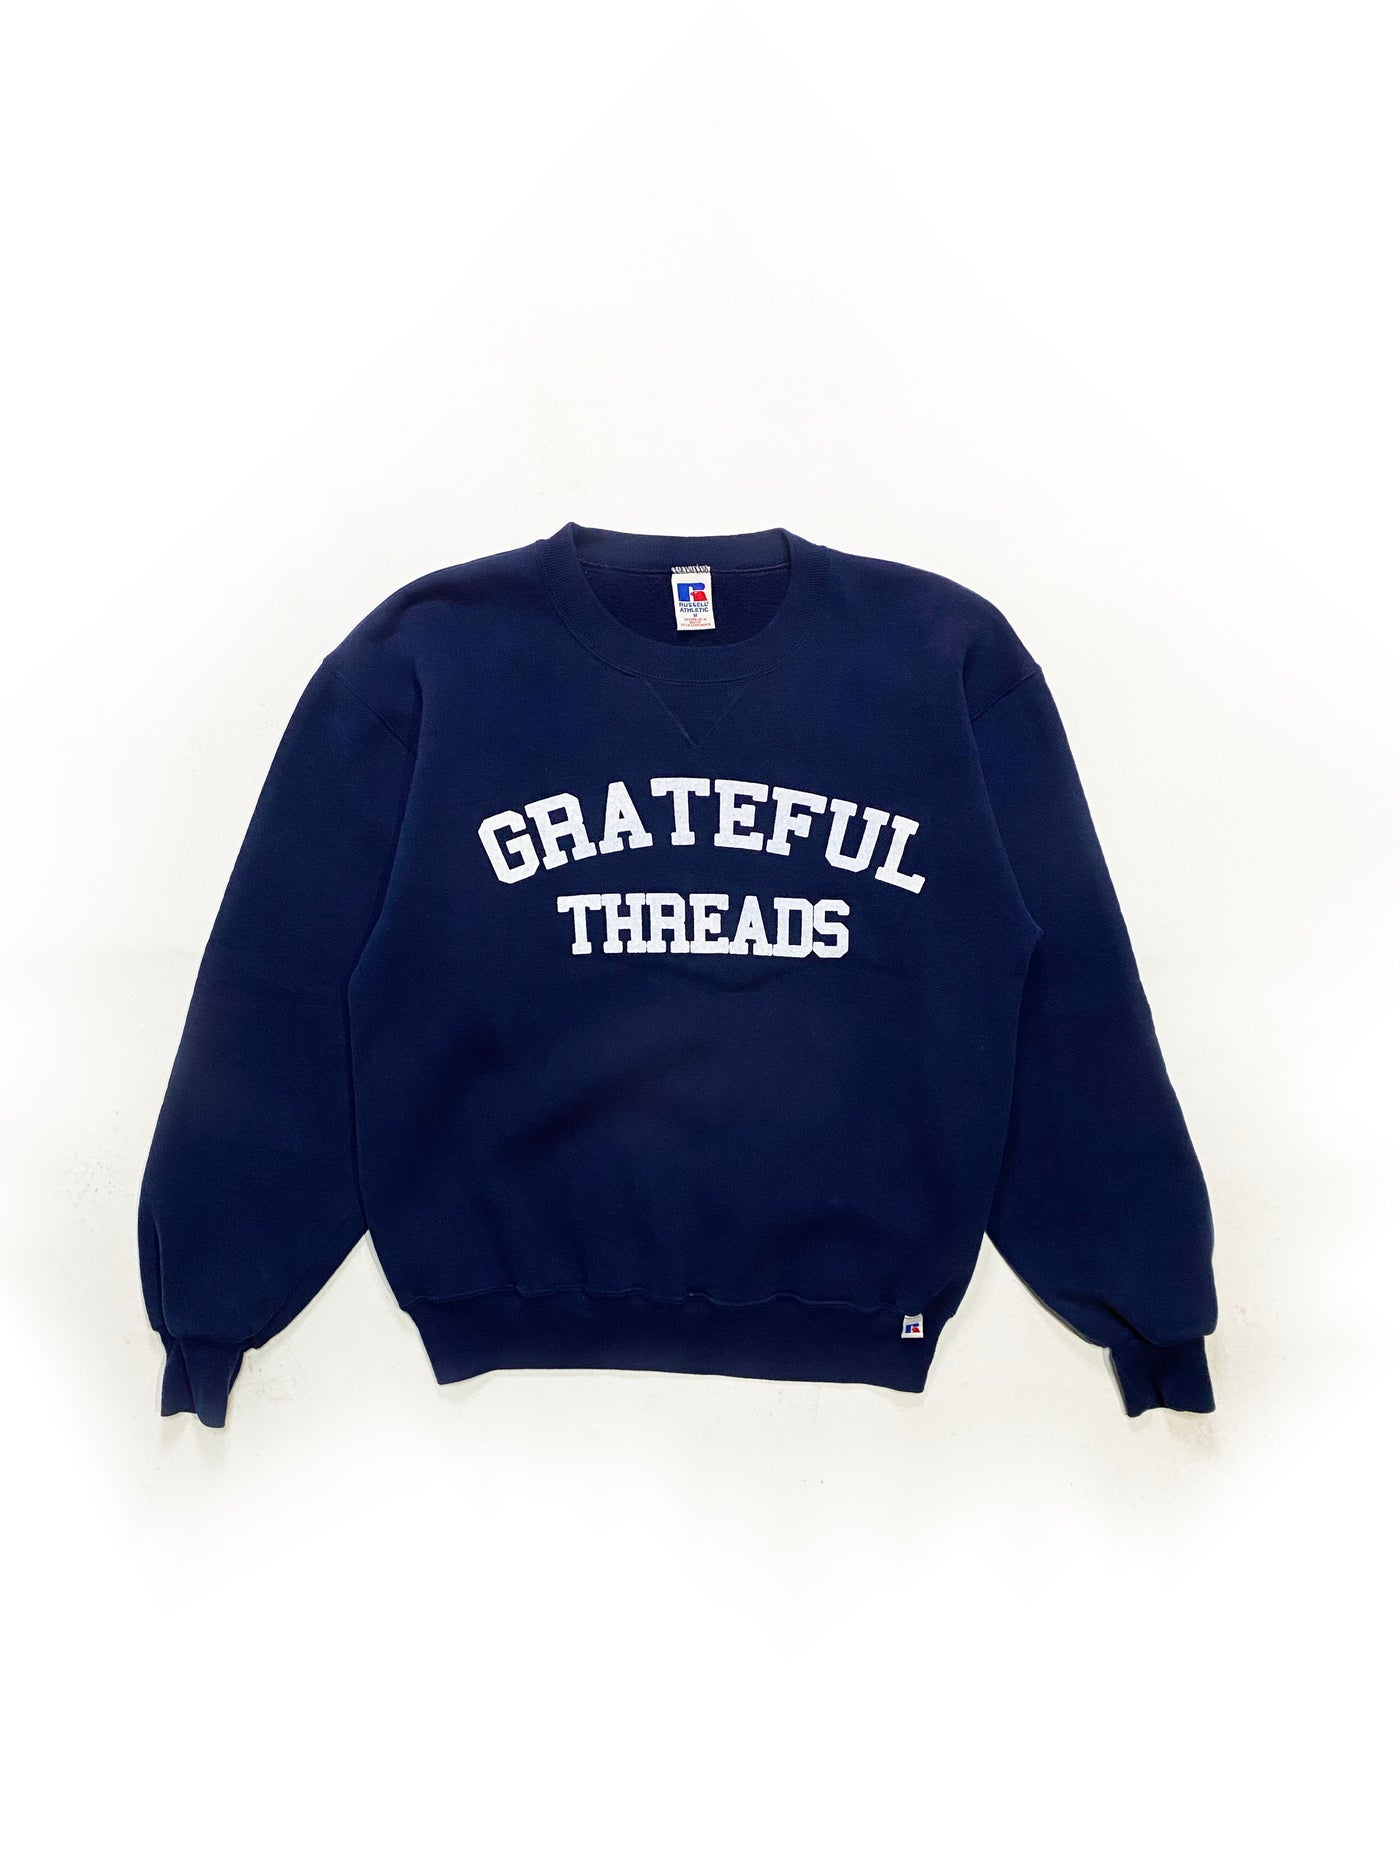 90s Russell Grateful Threads Spellout Crewneck - Navy - Size M